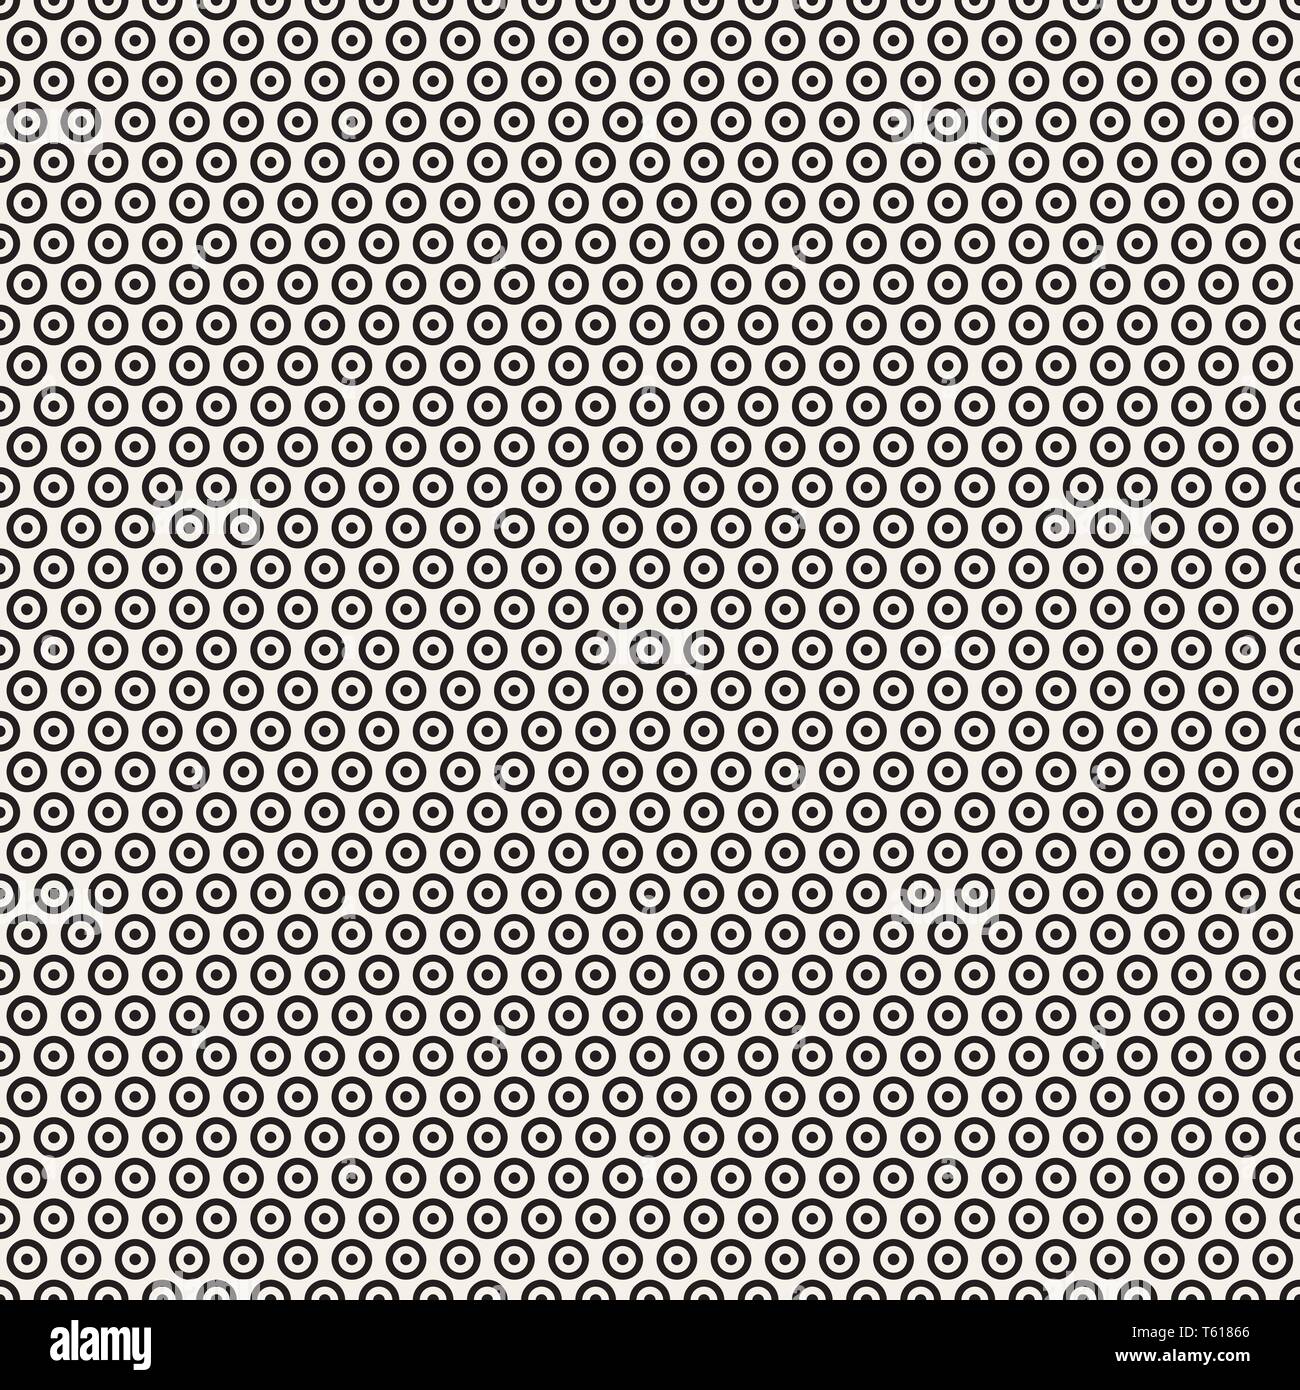 Circles seamless pattern. Wrapper vintage. Endless decorative linear round texture. Black white version. Vector illustration for your design. Stock Vector